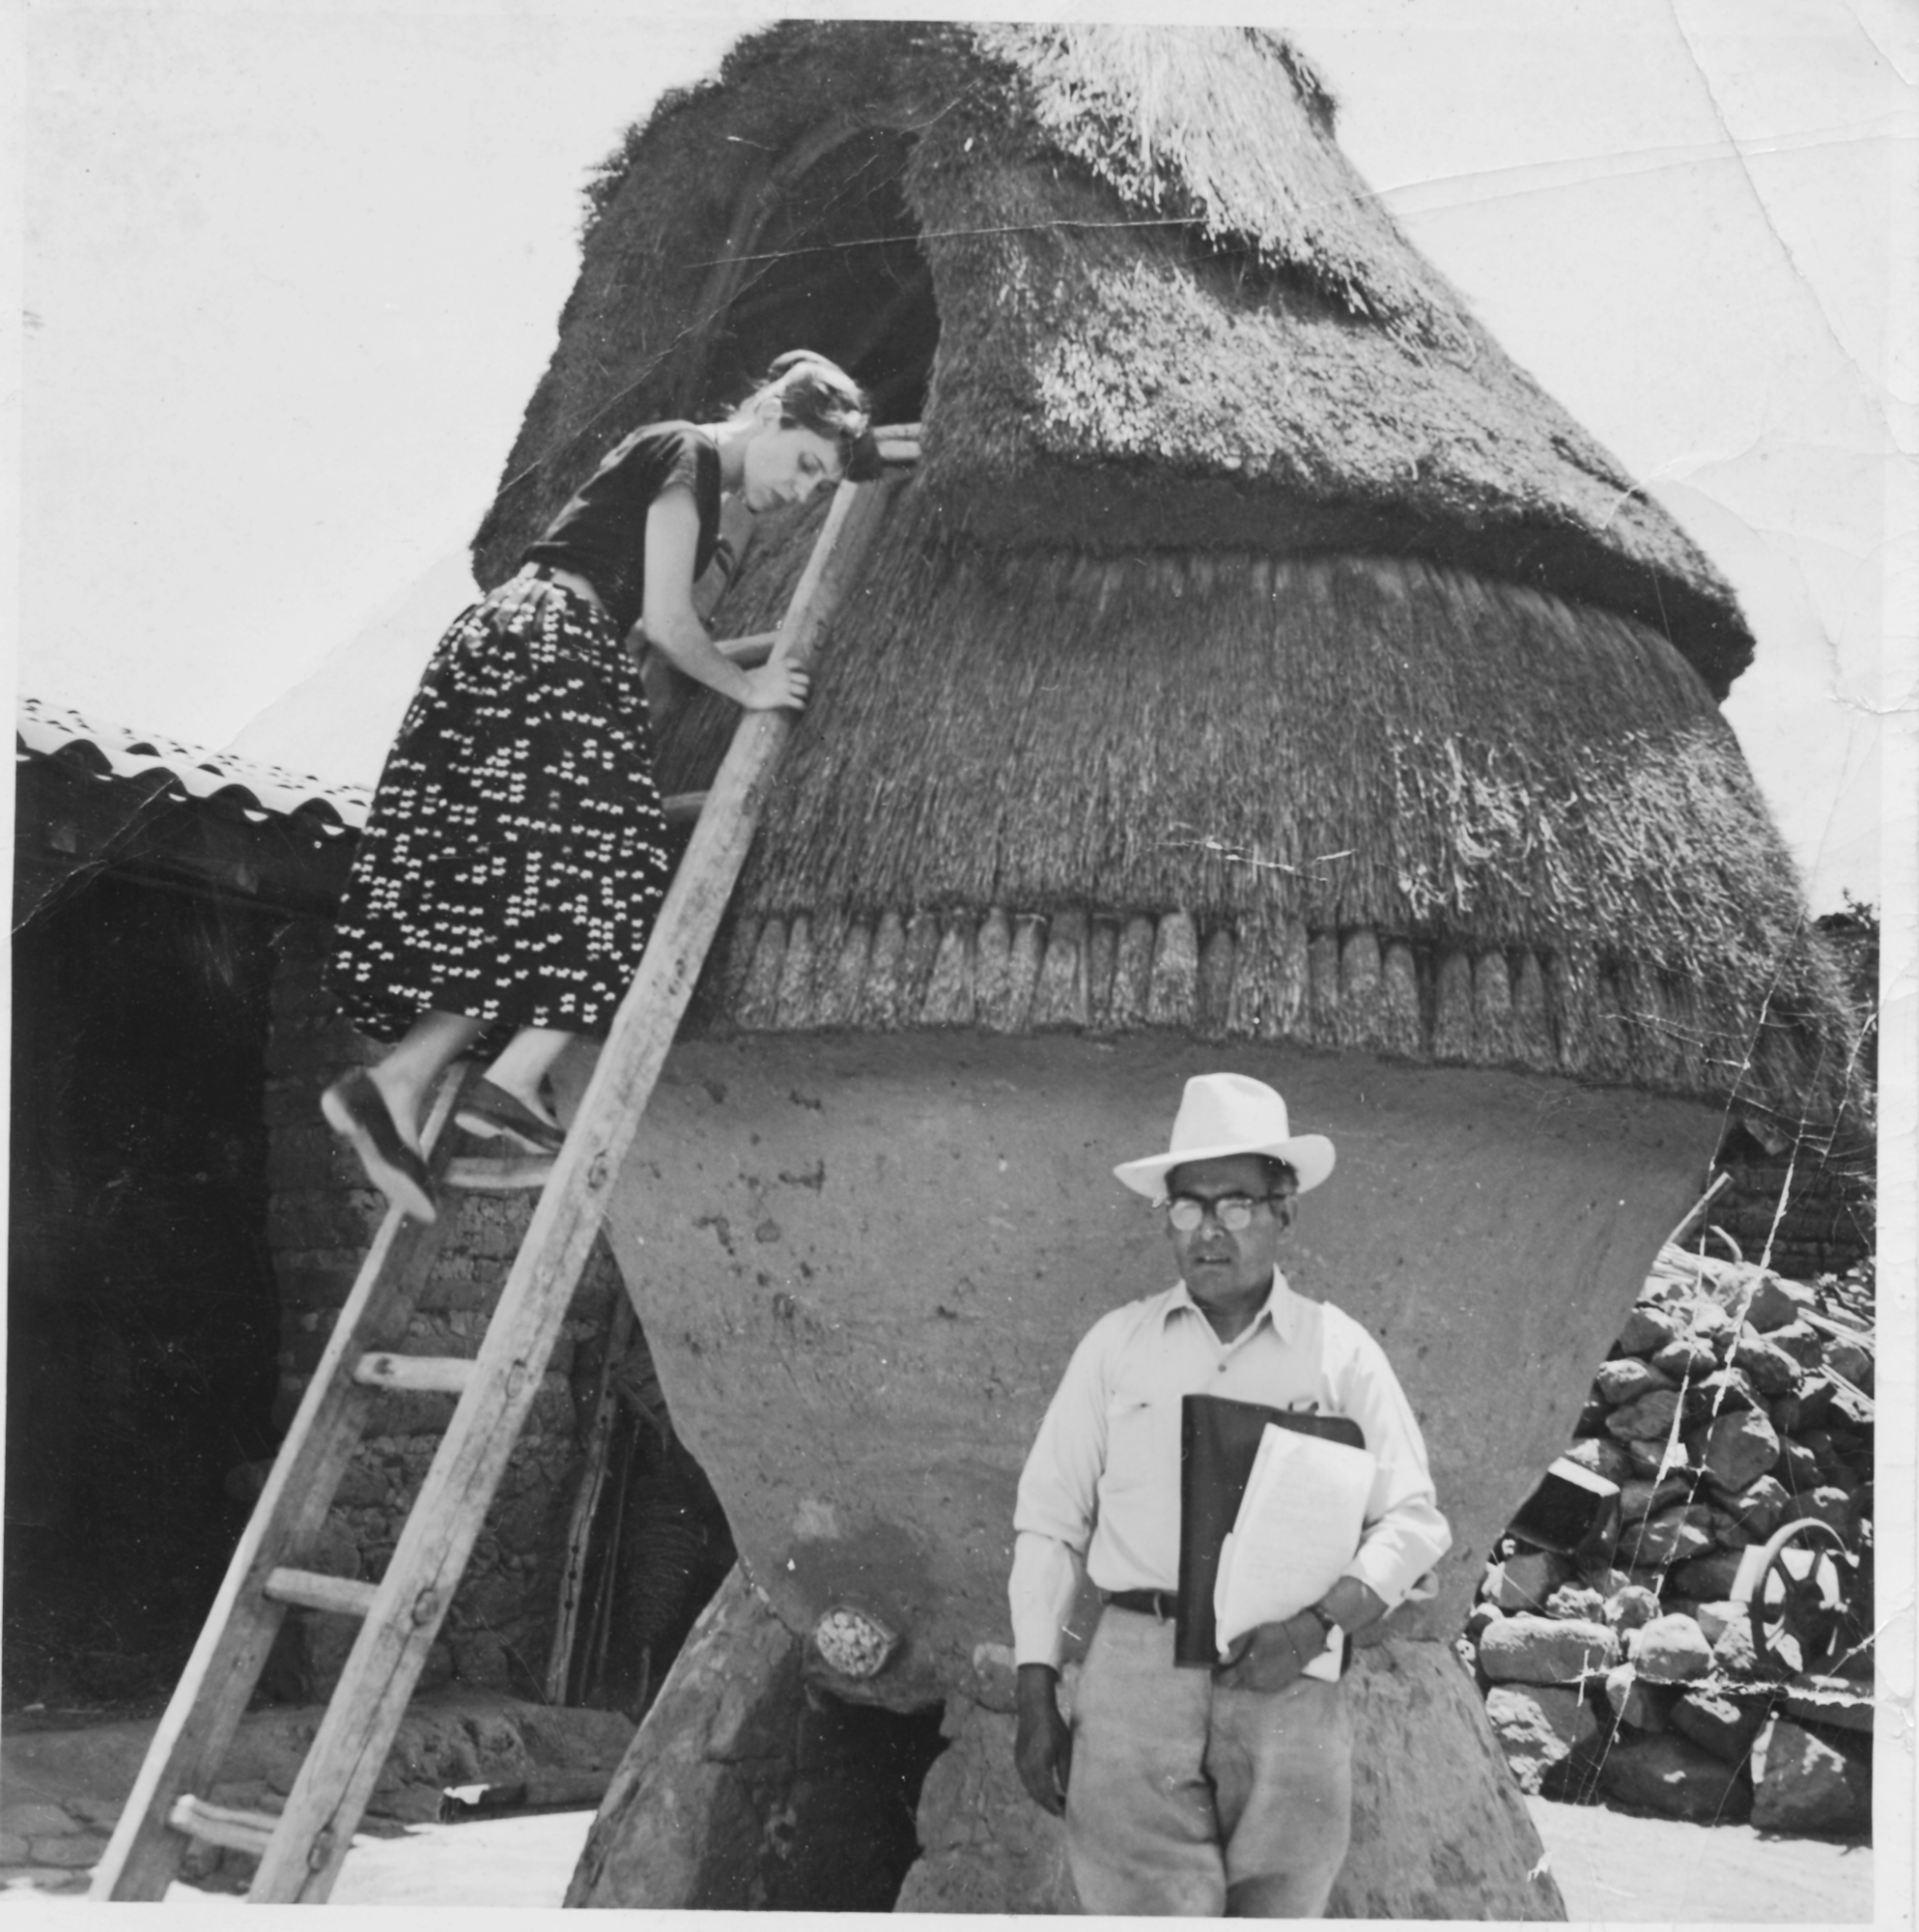 Dora Walters during one of her trips to check on work going on in Mexico.